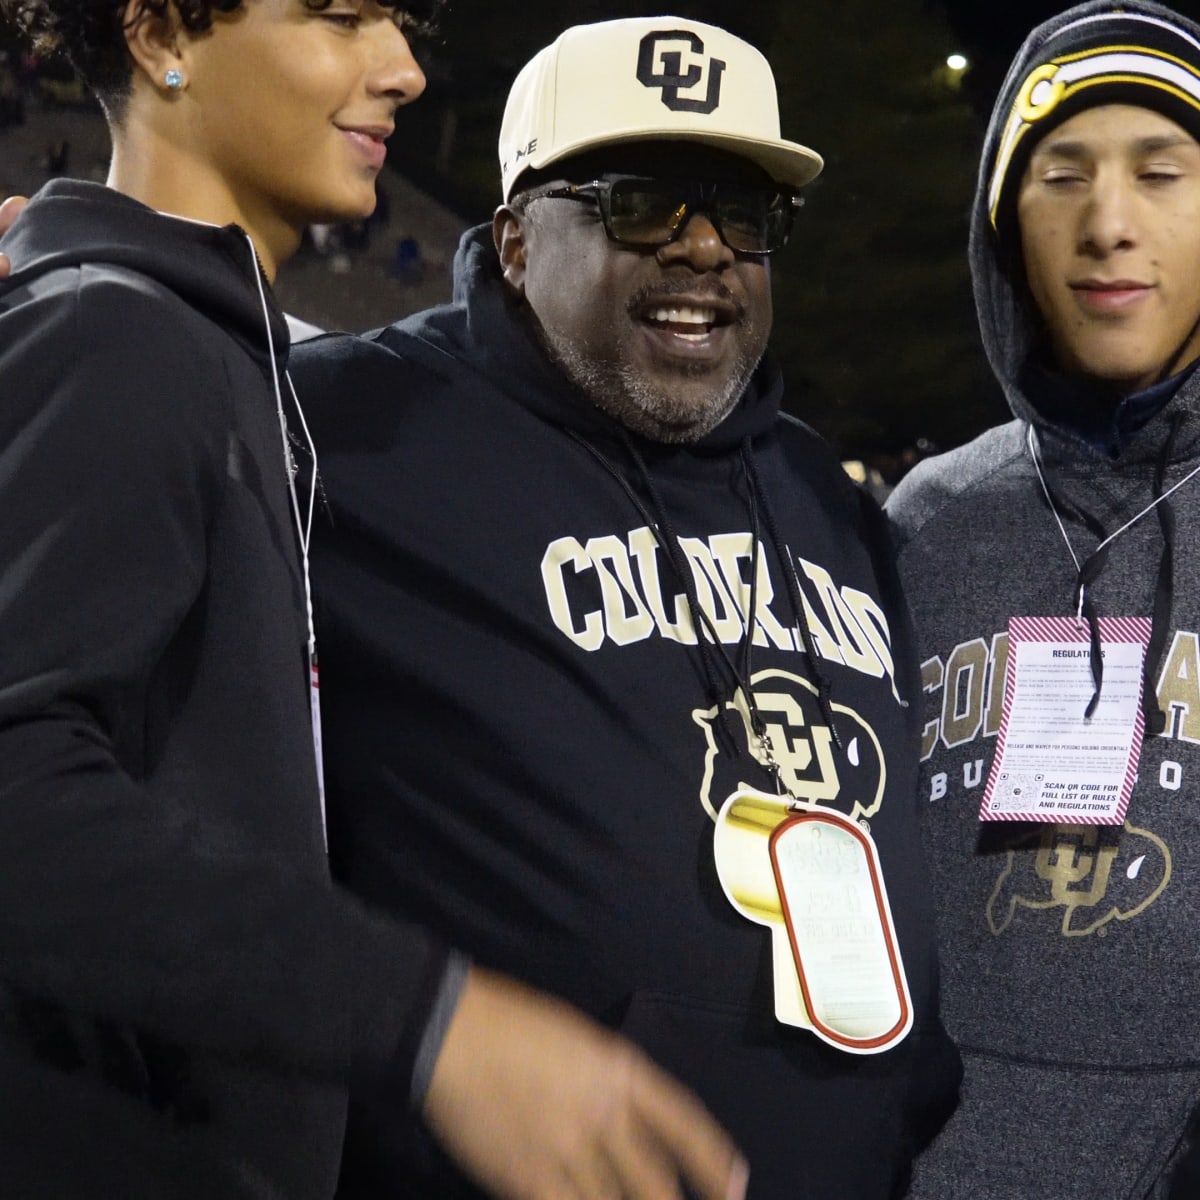 CU football scores dramatic win as celebrities and national media